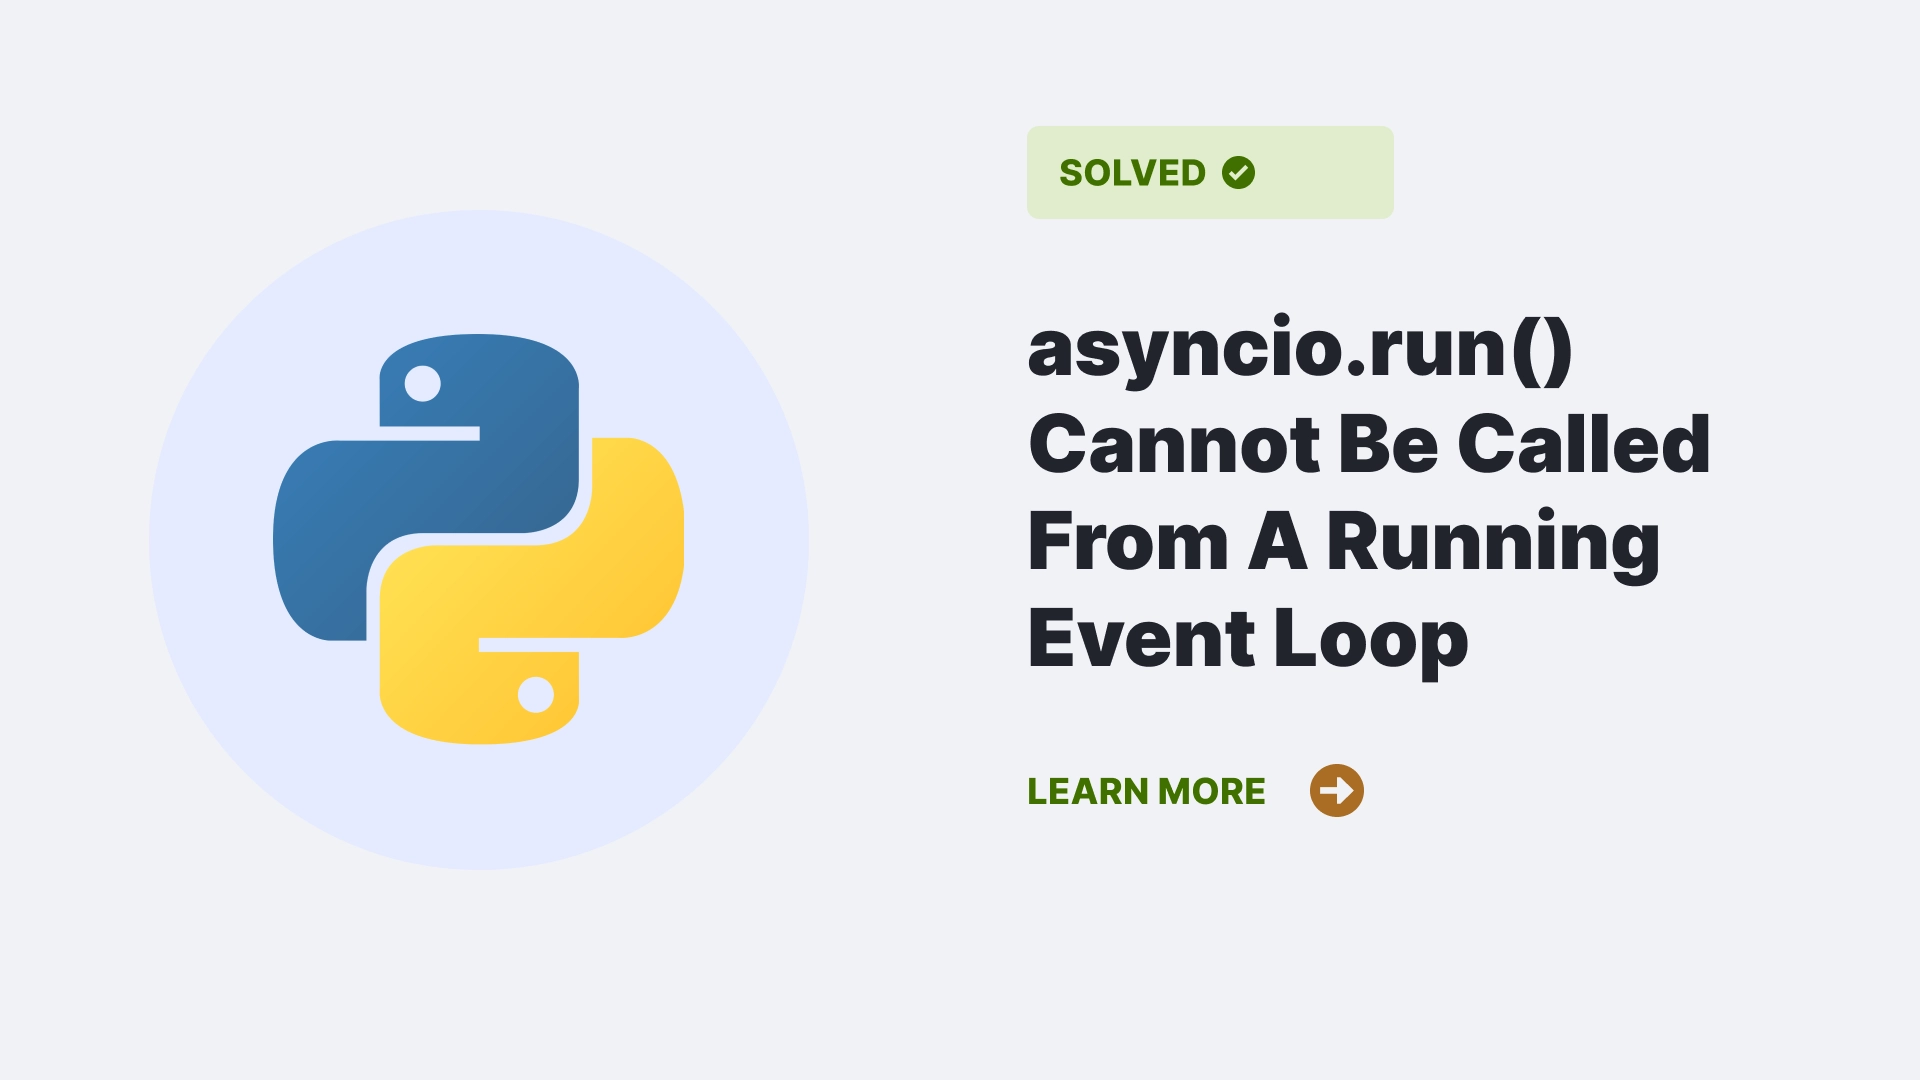 asyncio.run() Cannot Be Called From A Running Event Loop